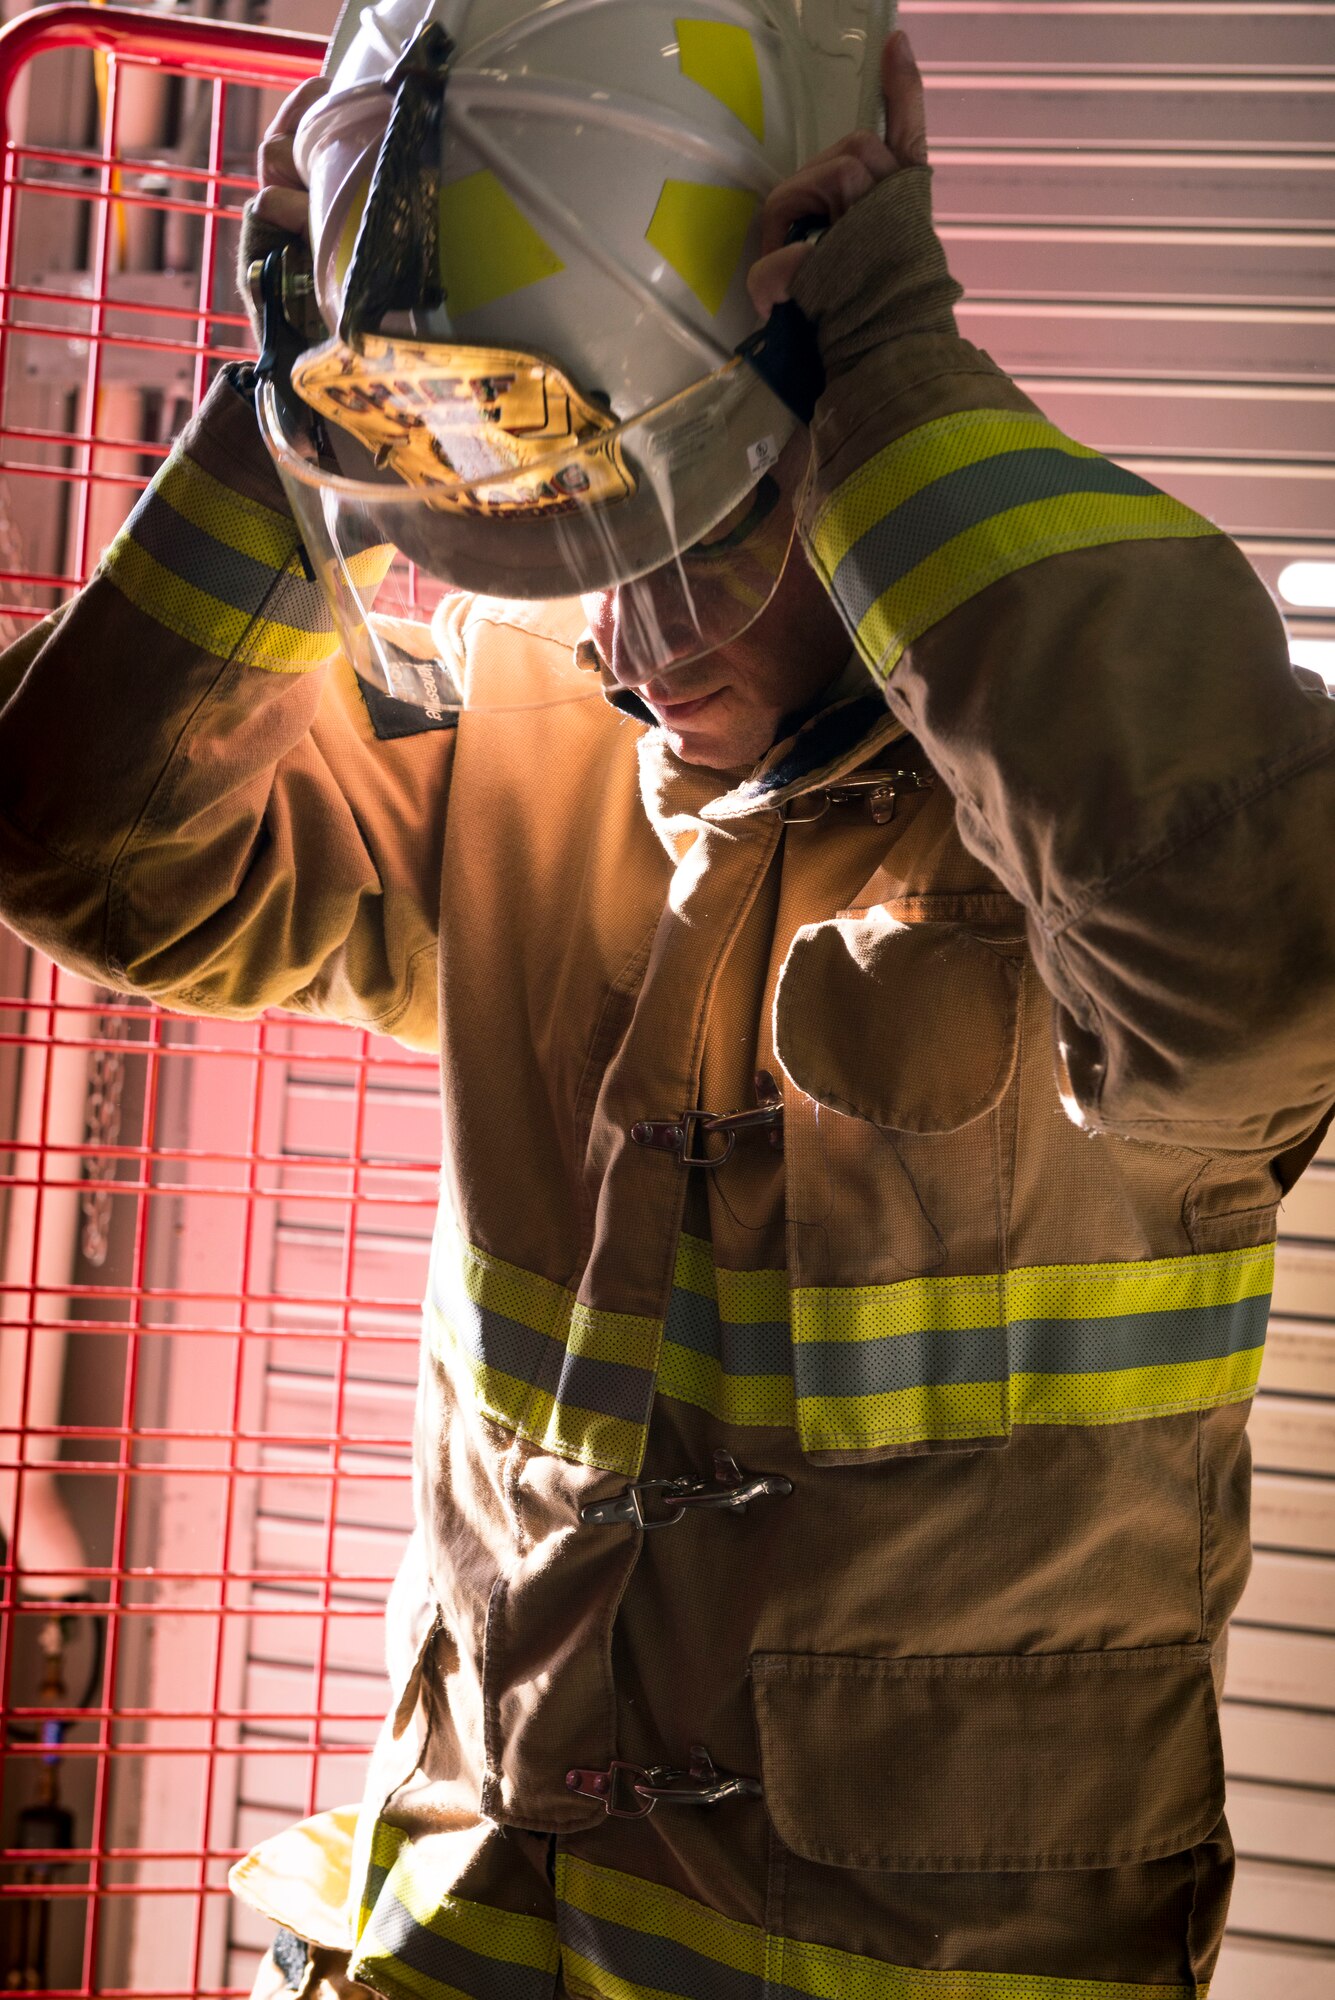 Chief Master Sgt. Robert Cross, Connecticut Air National Guard fire chief, dons his fire helmet at the Bradley Air National Guard Fire Station Nov. 3, 2019 East Granby, Conn. Bradley firefighters provide mutual aid response to the Bradley International Airport firefighters when they receive calls for service. (U.S. Air National Guard photo by Airman 1st Class Chanhda Ly)